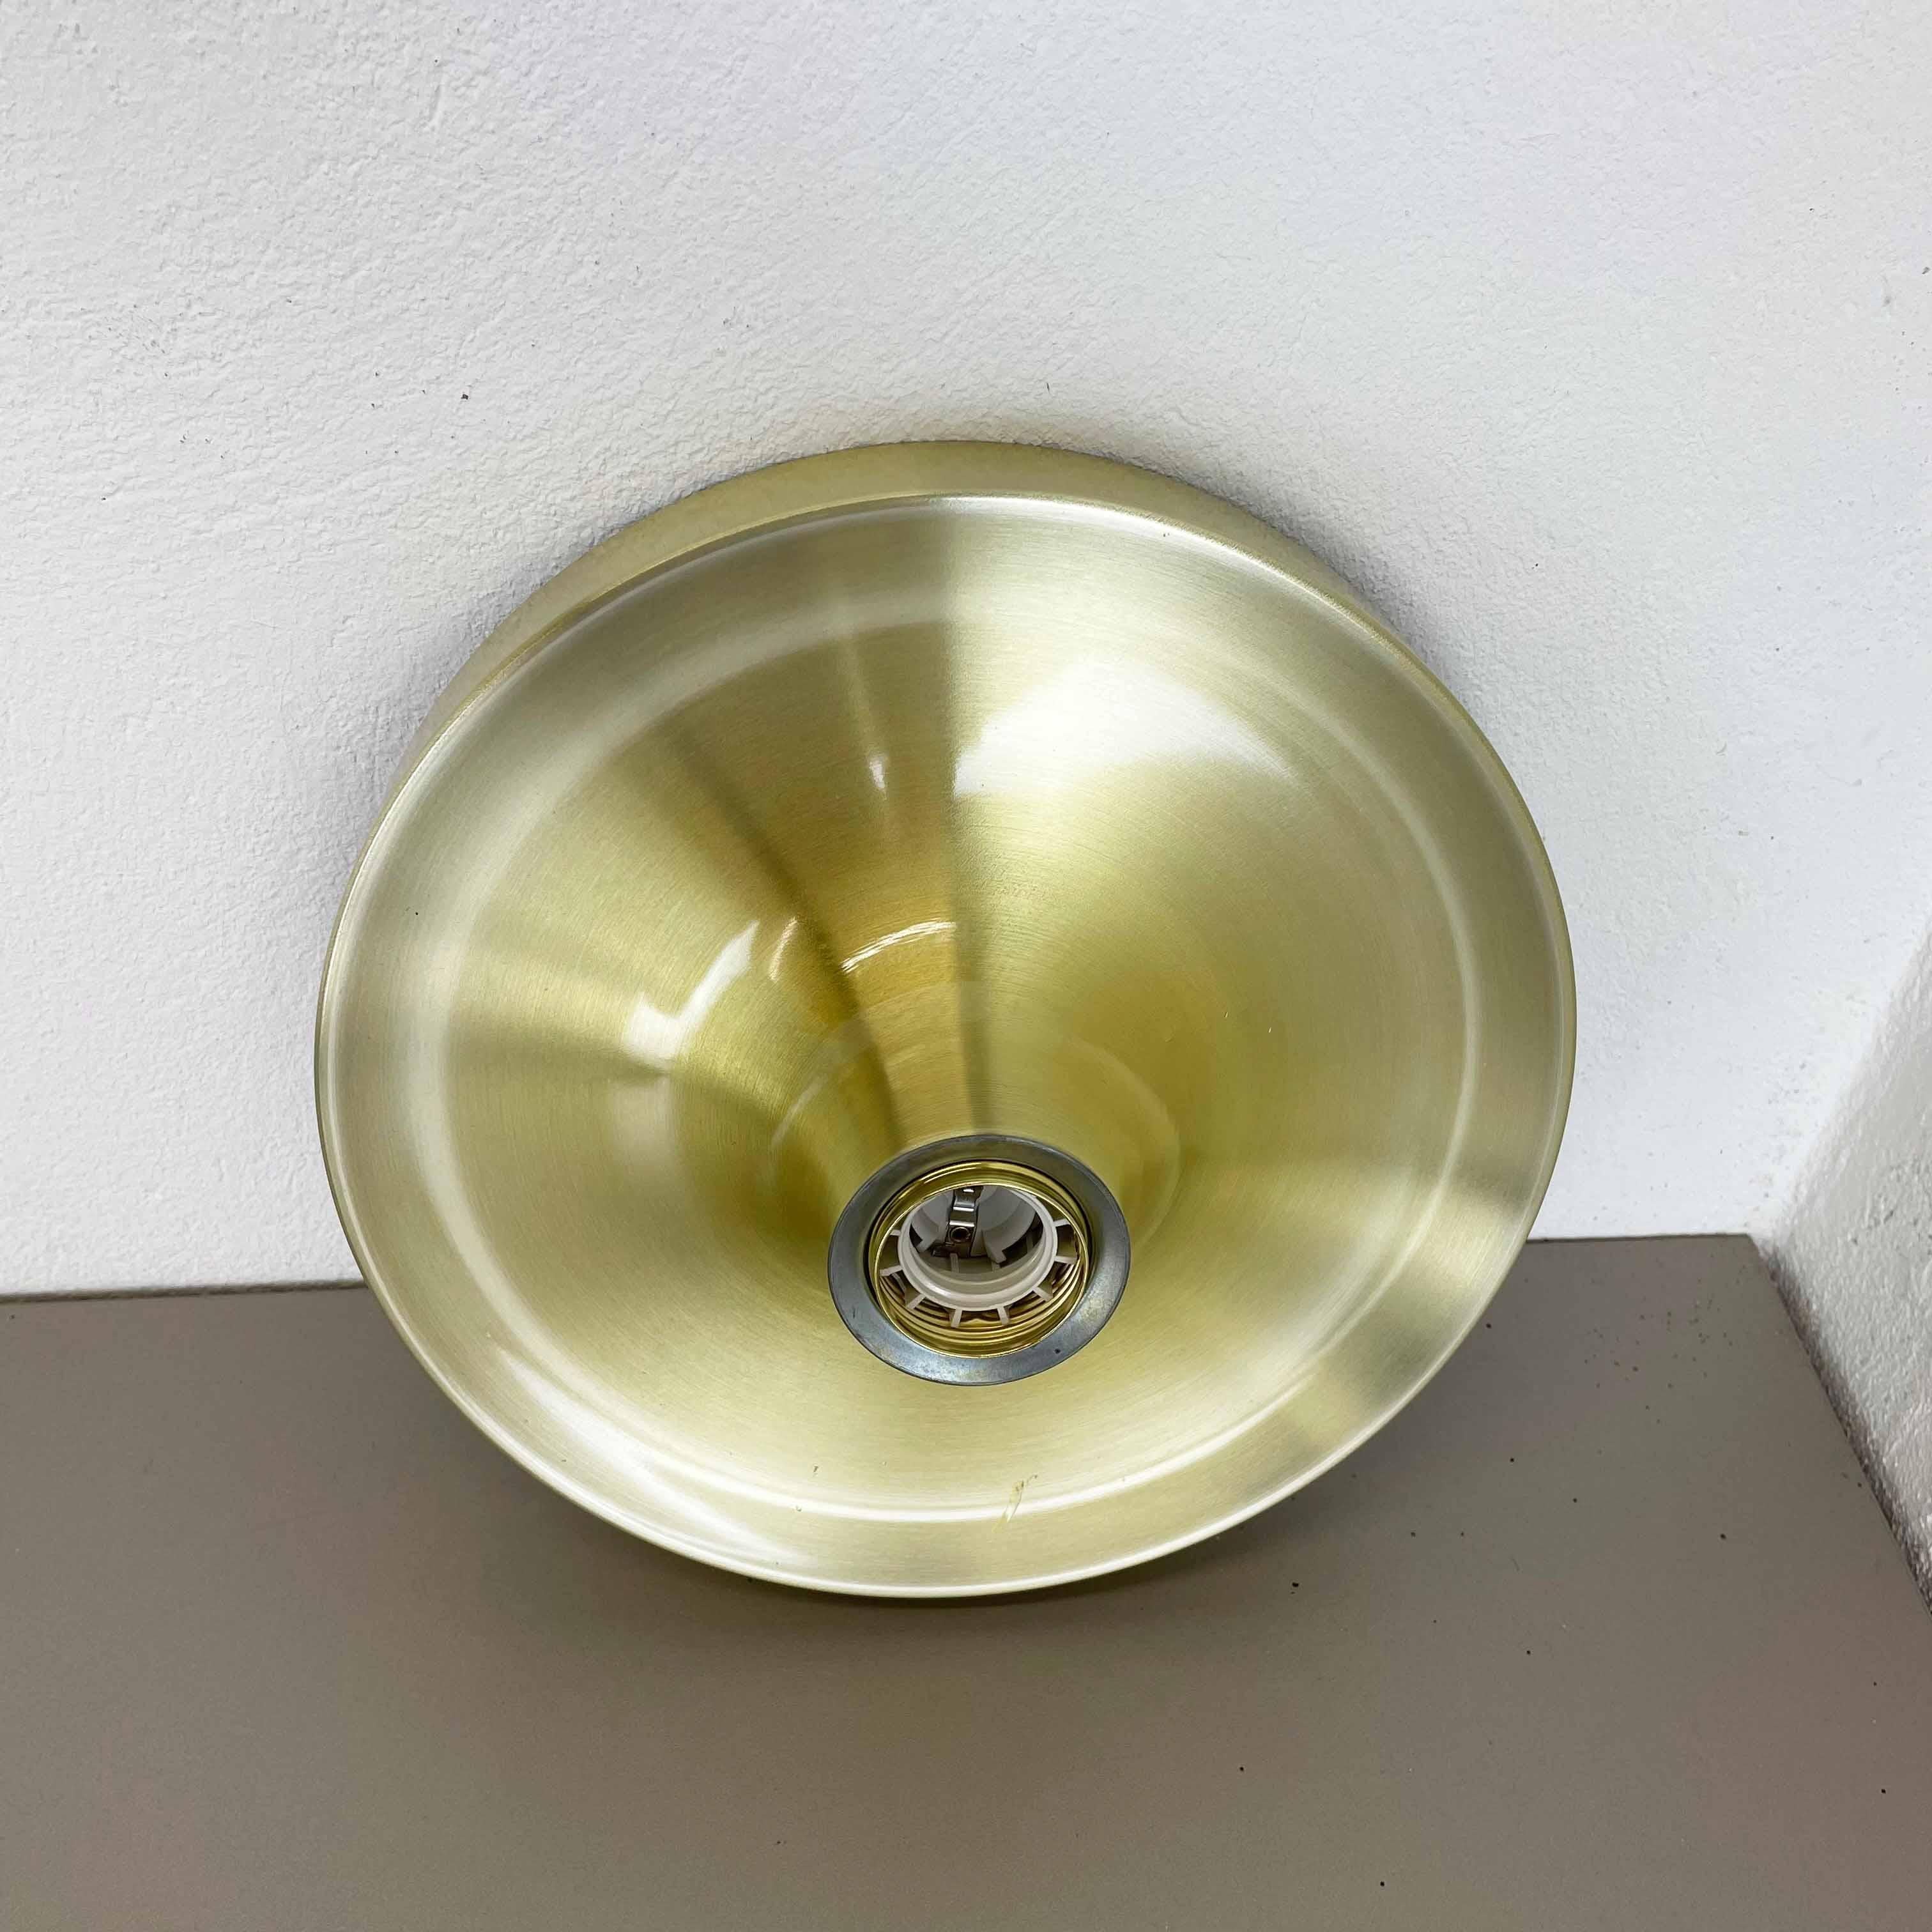 Rare Golden 1970s Charlotte Perriand 25cm Disc Wall Light by Honsel, Germany For Sale 4